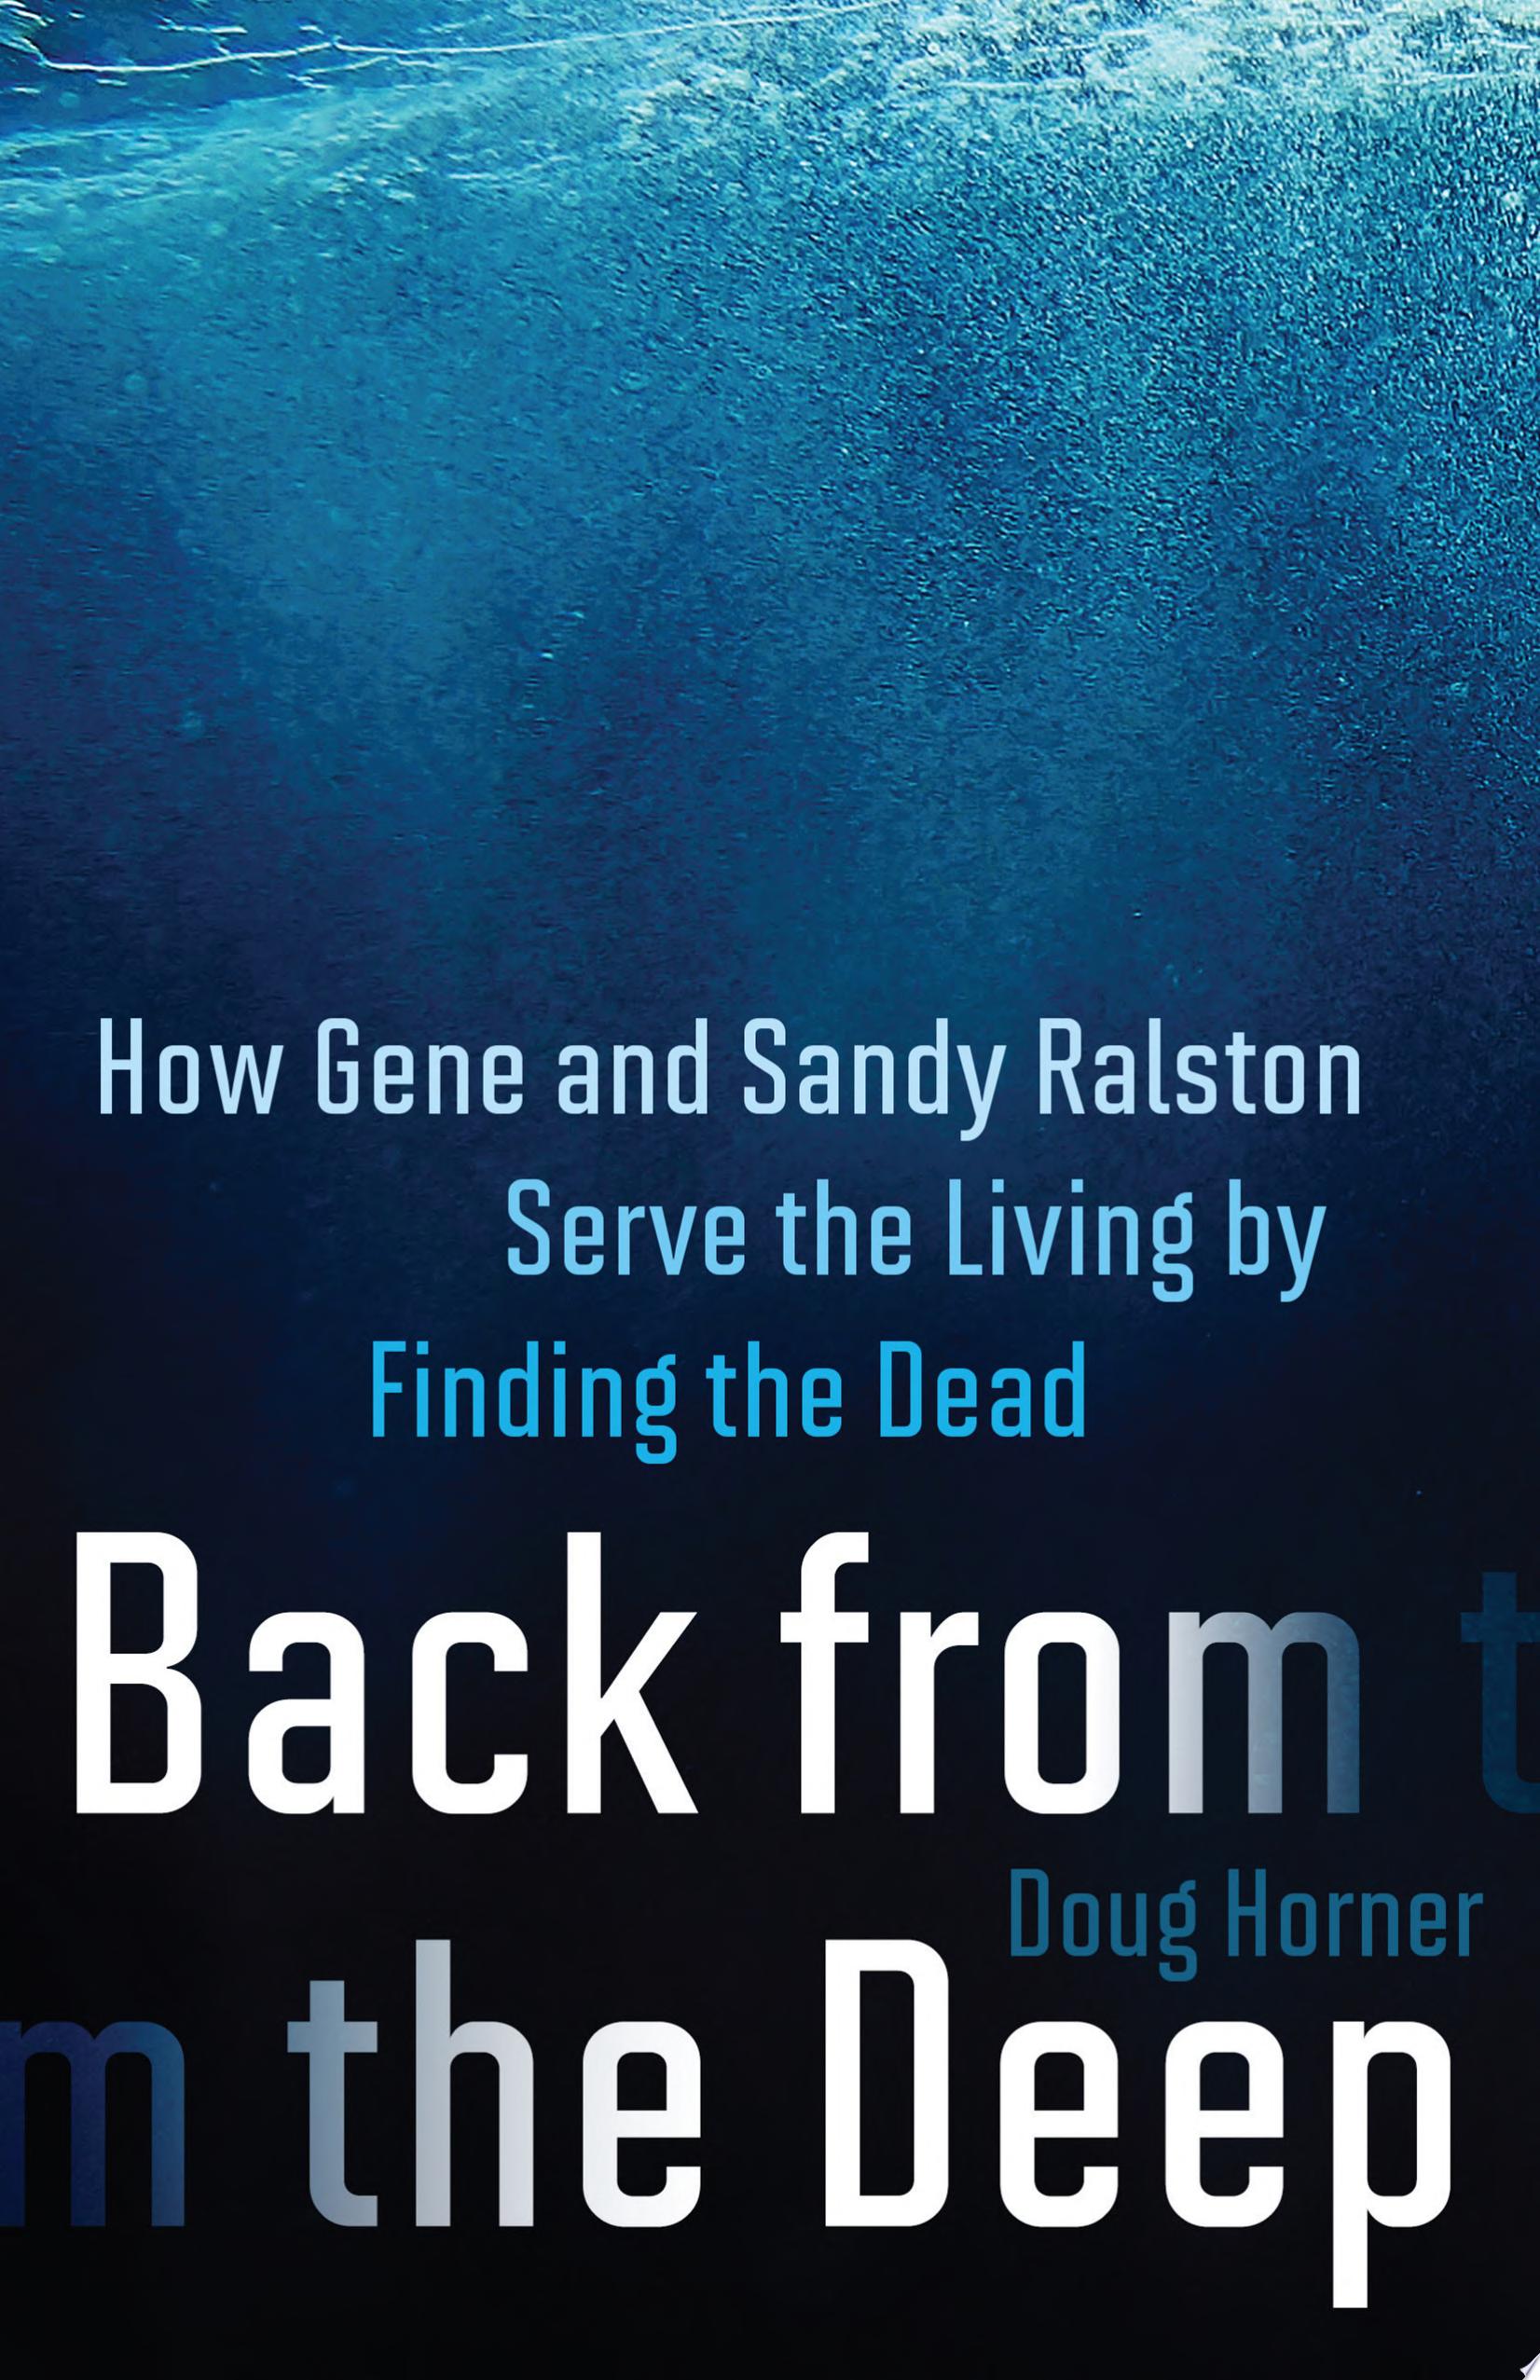 Image for "Back from the Deep"